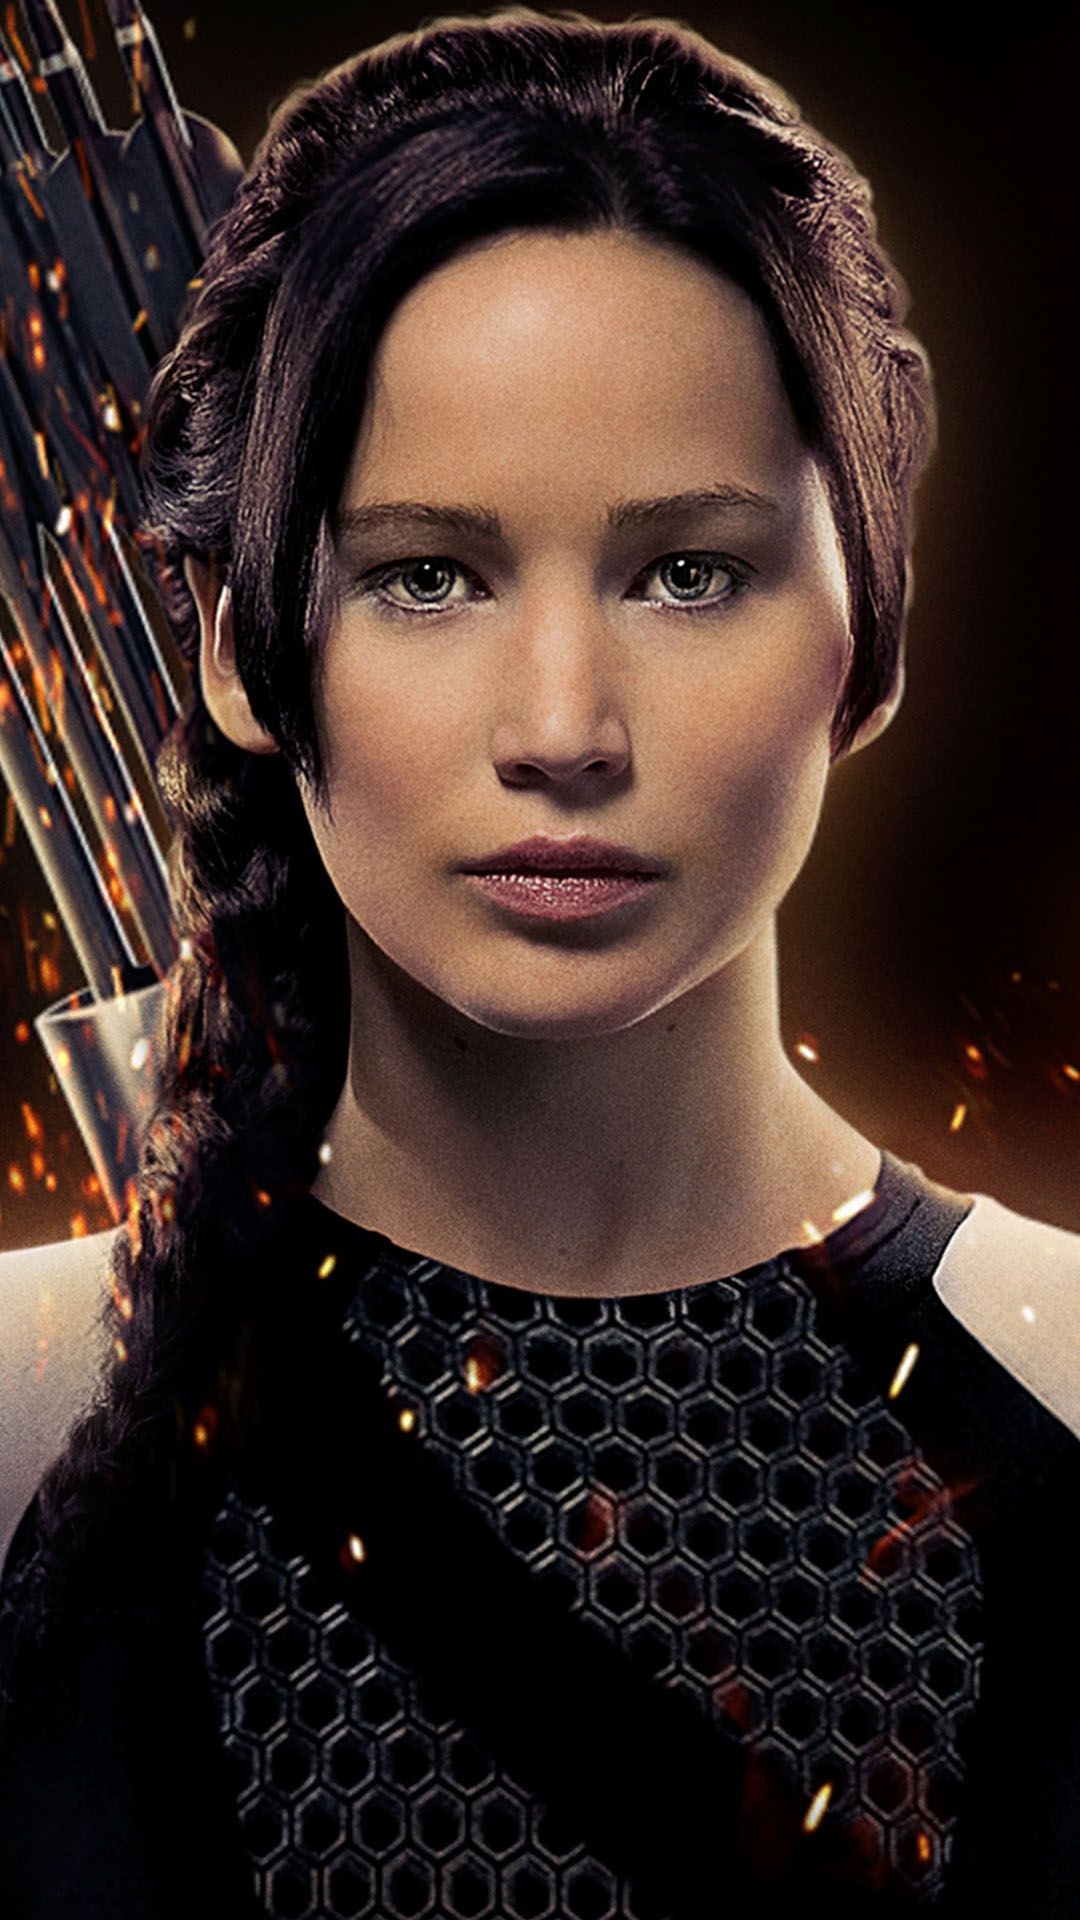 Hunger Games names, Hunger Games characters, Jennifer Lawrence Hunger Games, 1080x1920 Full HD Handy